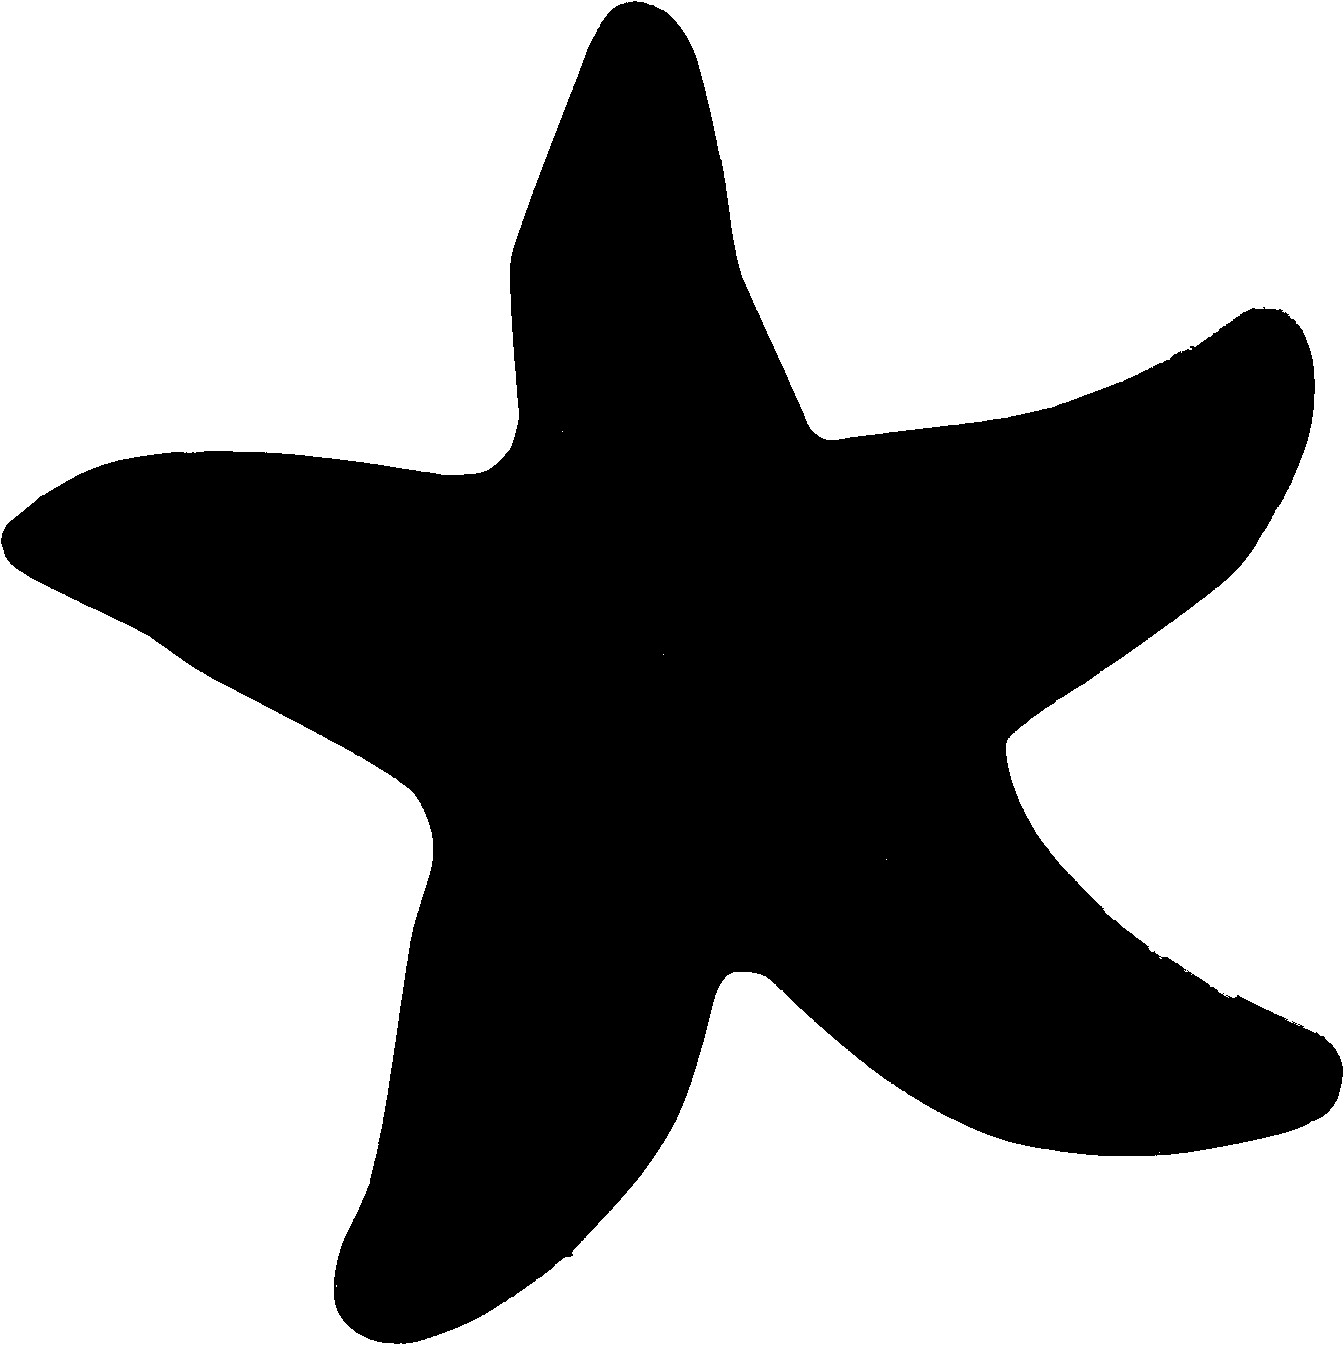 Star fish outline best. Seafood clipart silhouette